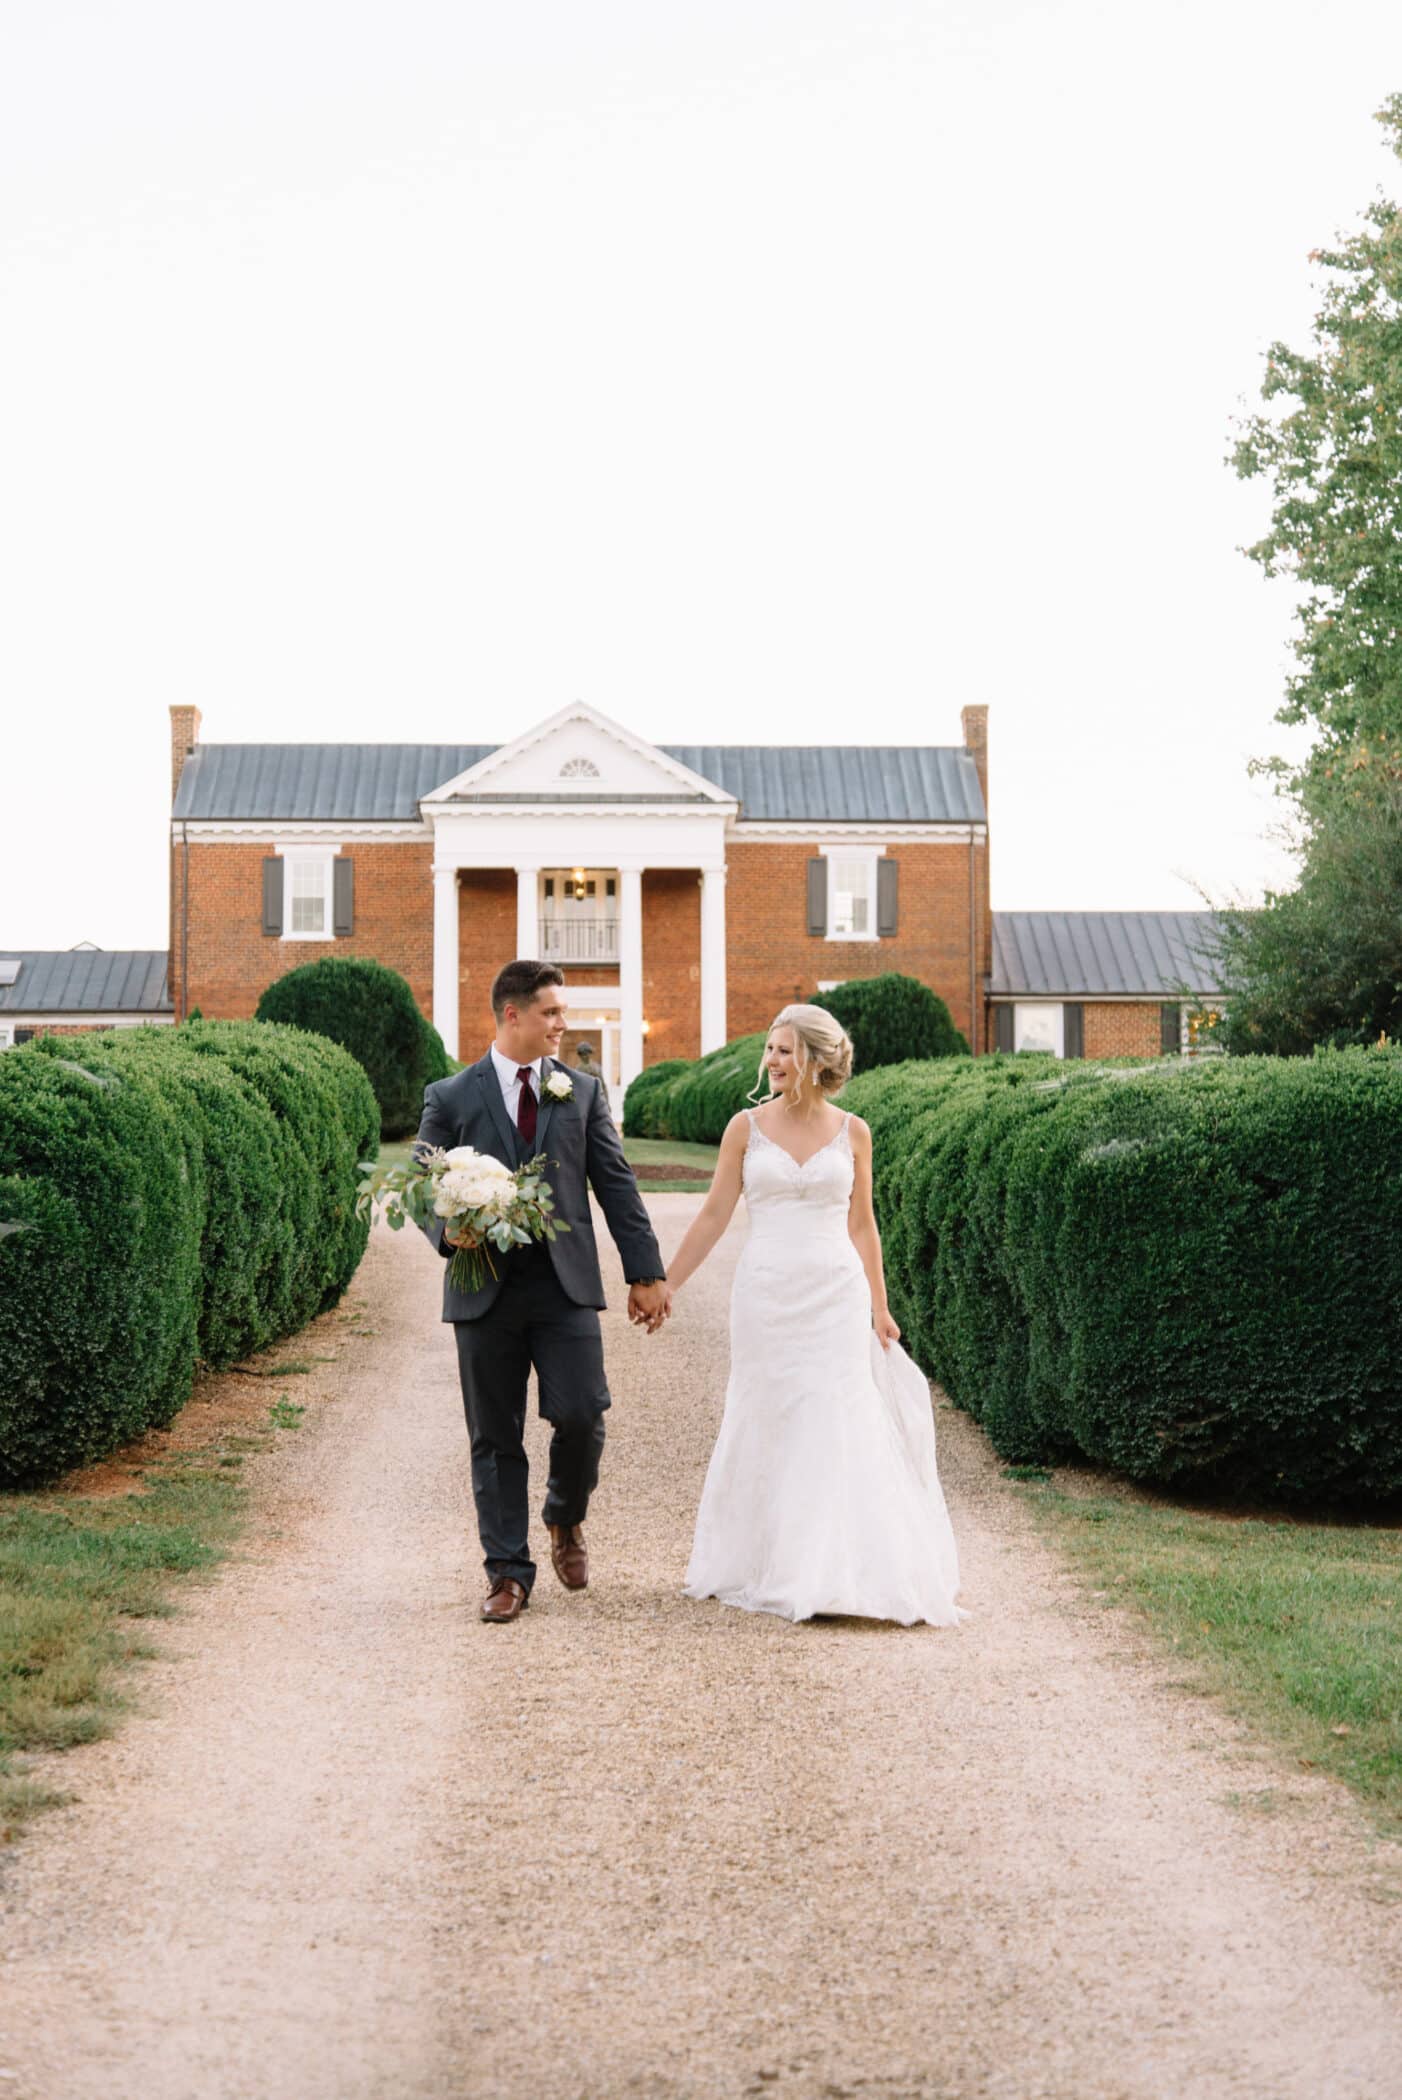 Selecting Your Virginia Wedding Venue | Entwined Events | Venue: West Manor Estate in Forest, VA | Photo Credit: Nicole Colwell Photography